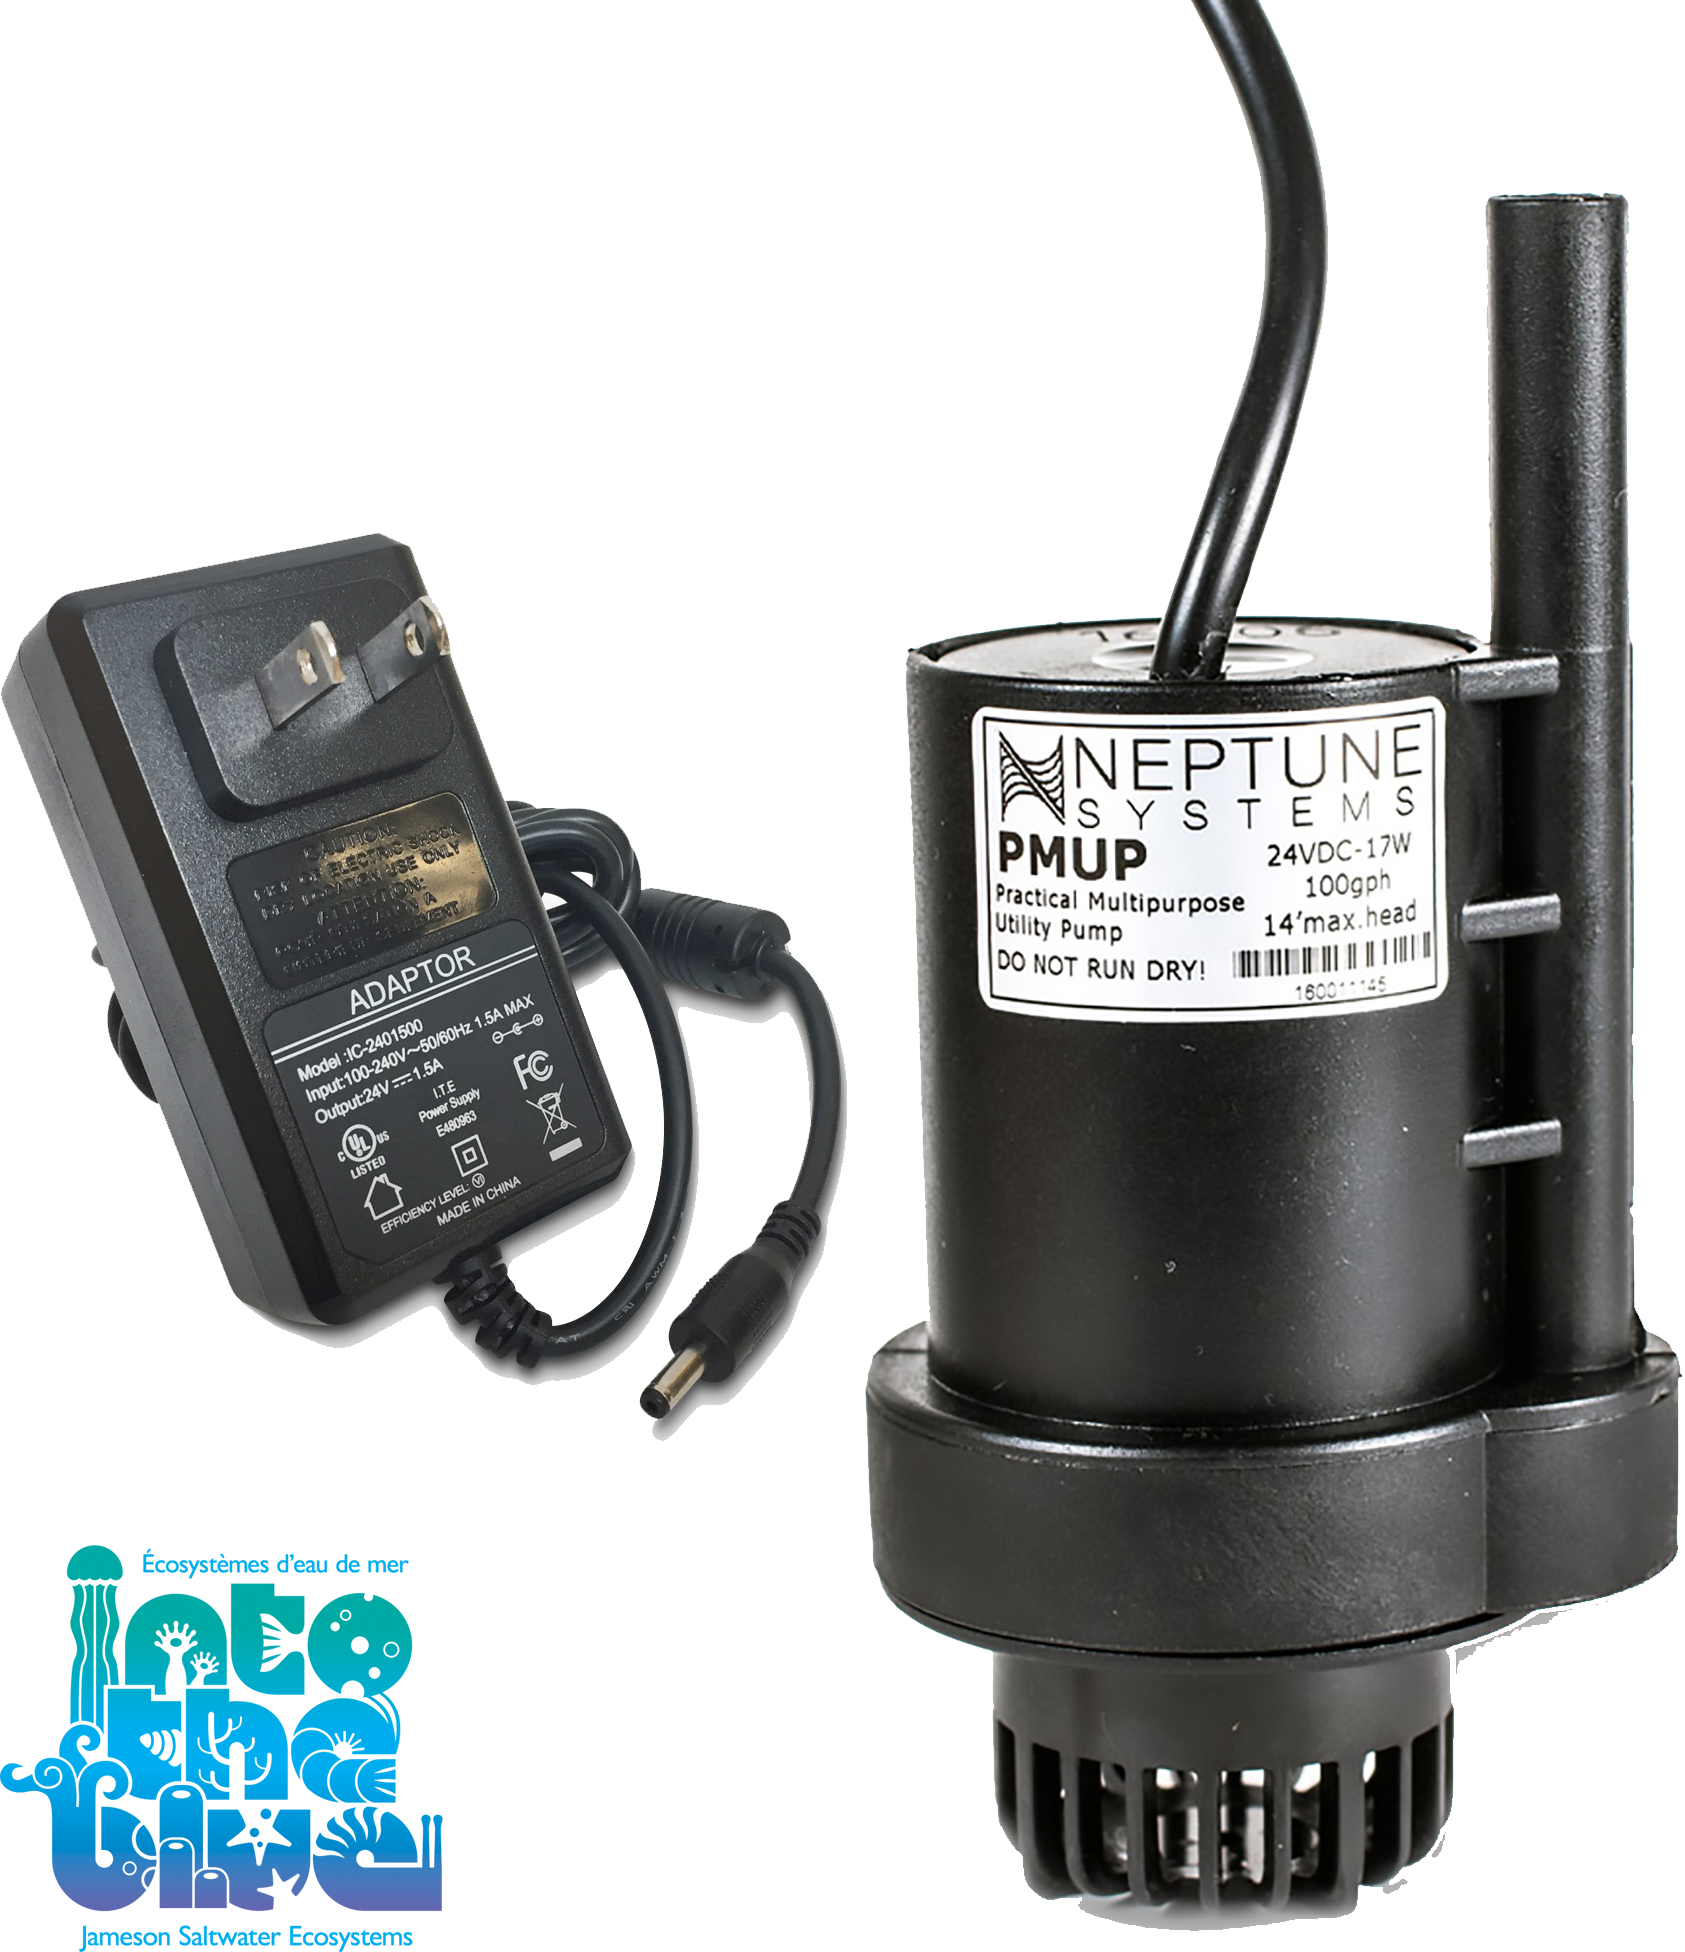 Neptune Systems - PMUP | Practical Multi-Purpose Utility Pump w/ Power Supply